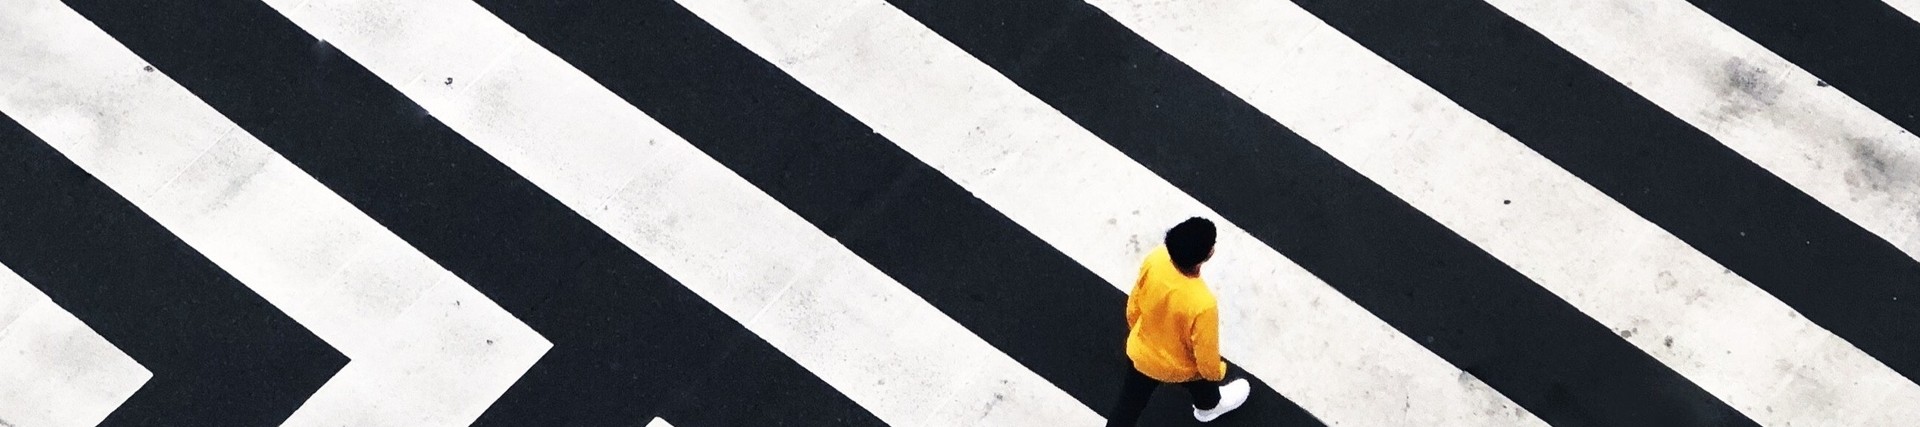 Person in yellow jumper crossing black and white striped road